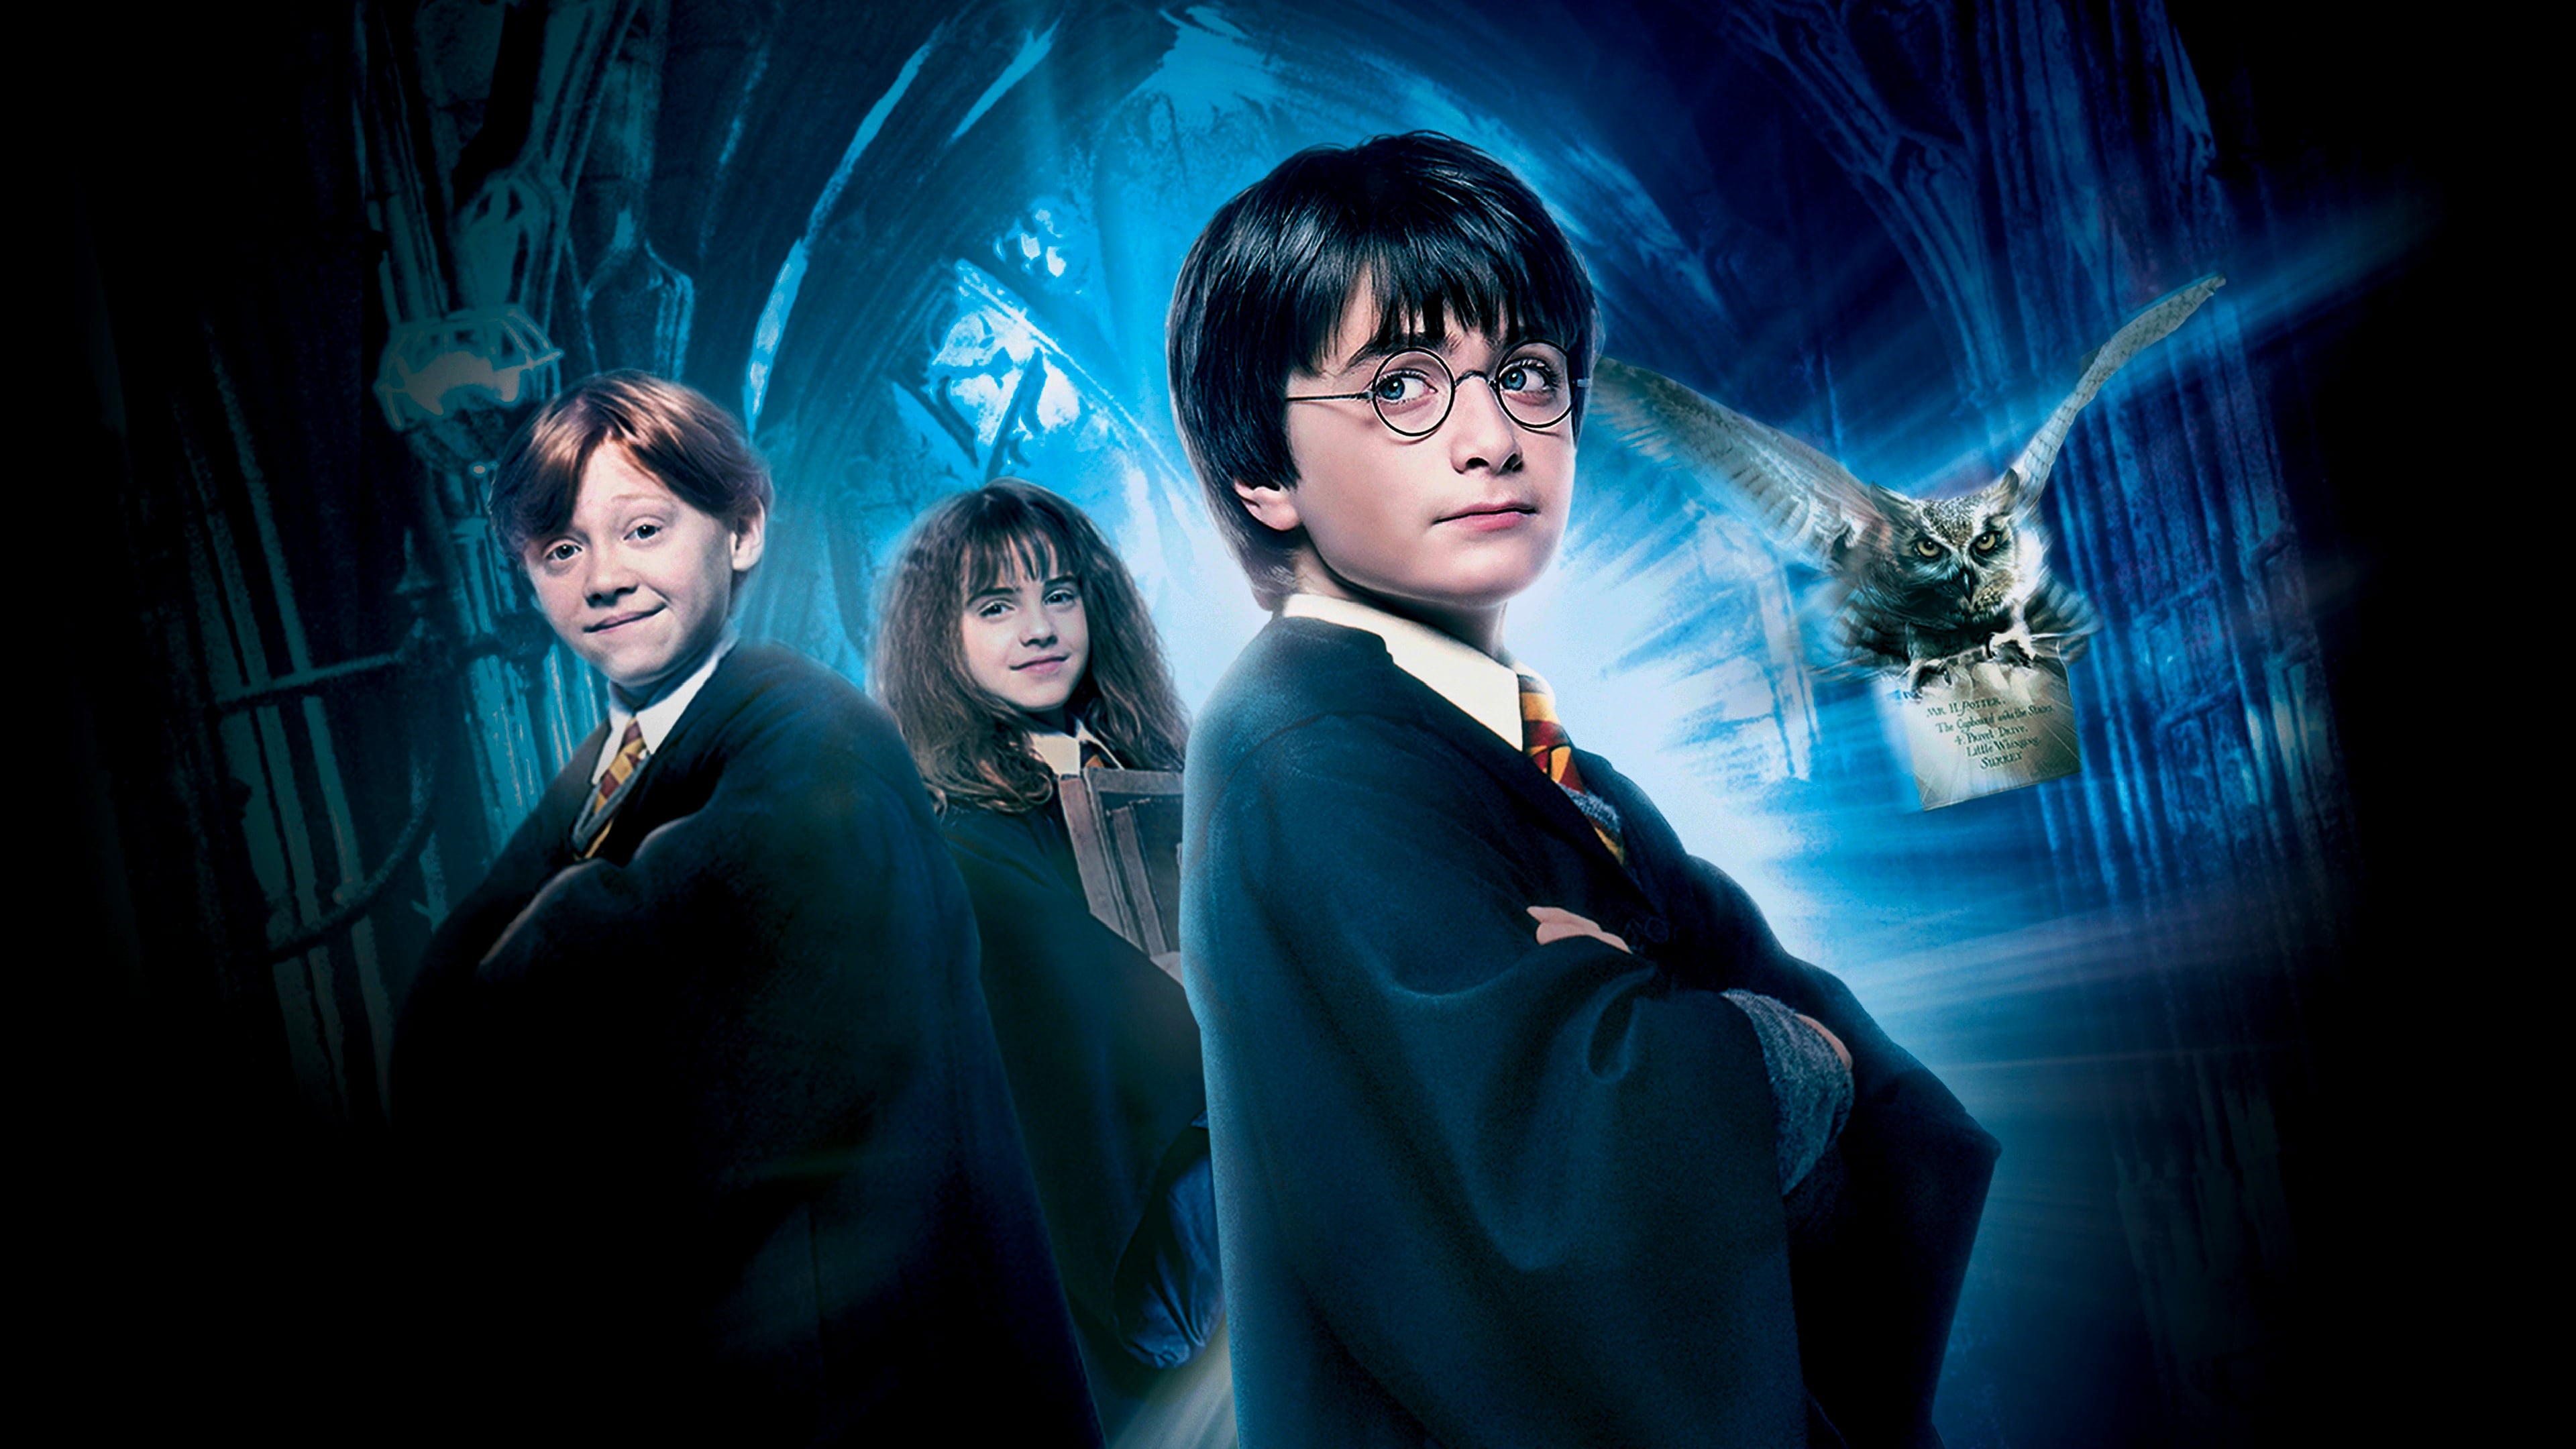 HD desktop wallpaper: Harry Potter, Movie, Harry Potter And The  Philosopher's Stone download free picture #496984